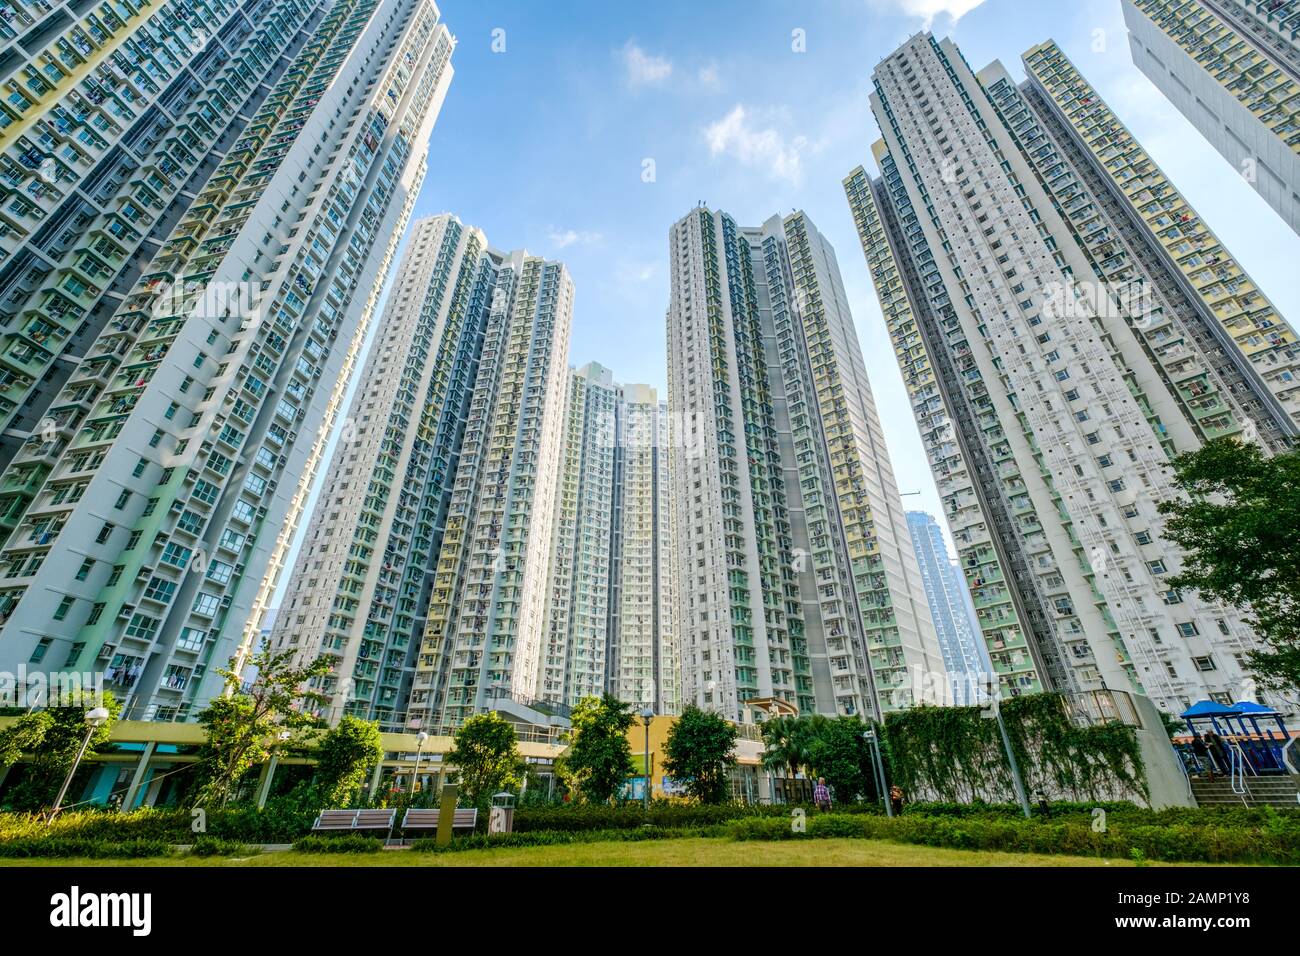 huge residential building complex, green court betweern high-rise apartment buildings - Stock Photo